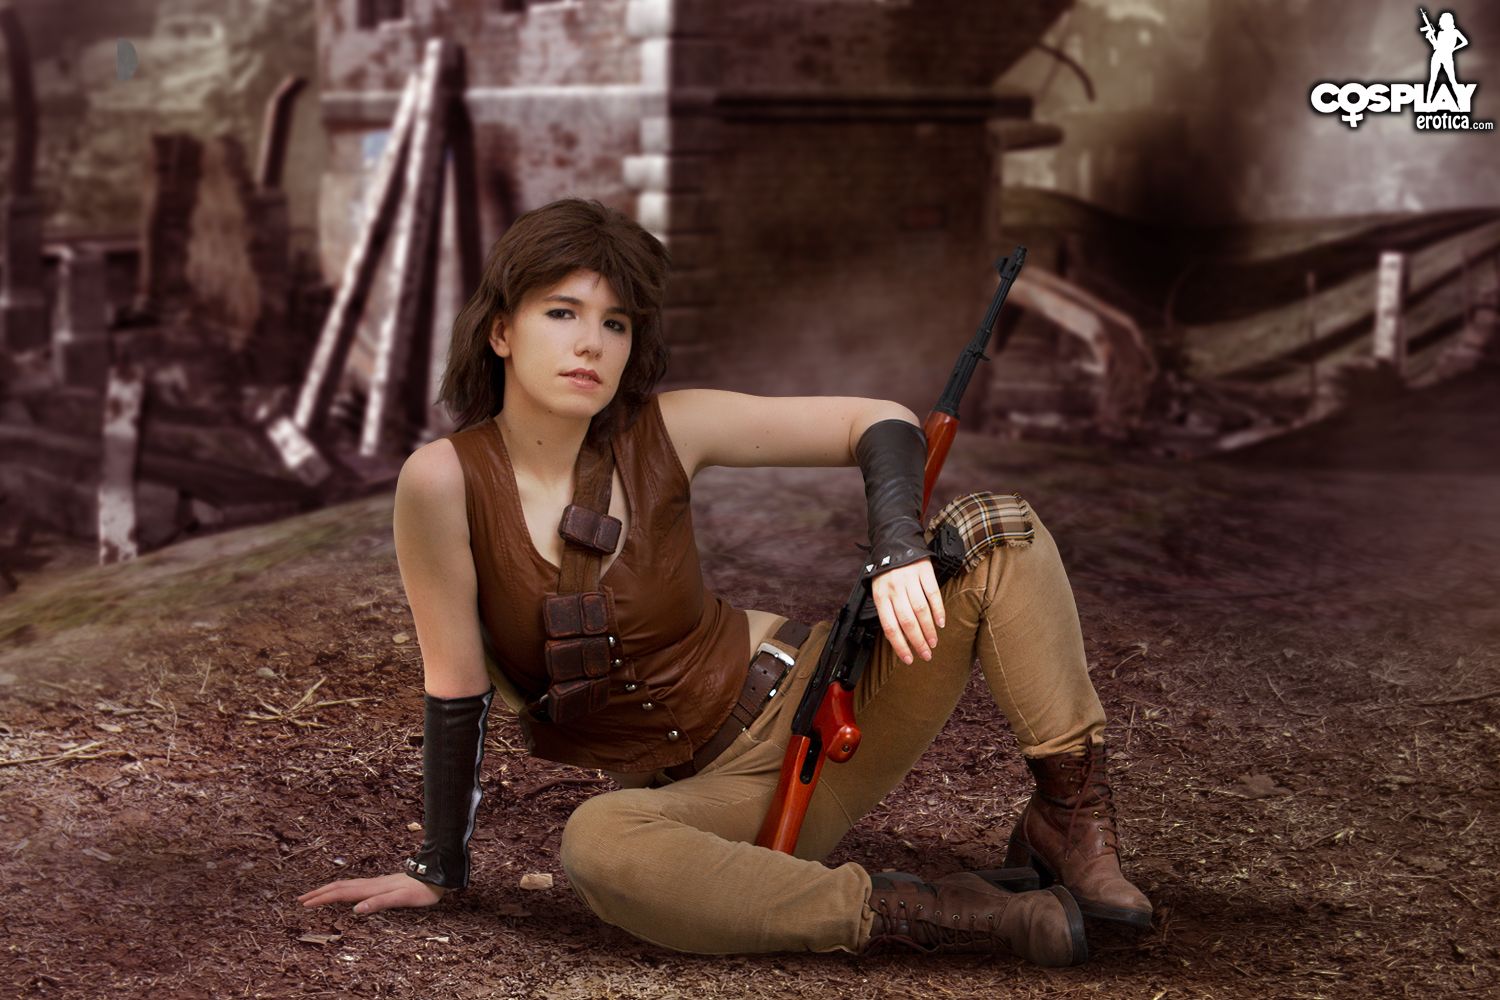 Cosplay Erotica’s Cassie Survives The Fallout As Cait